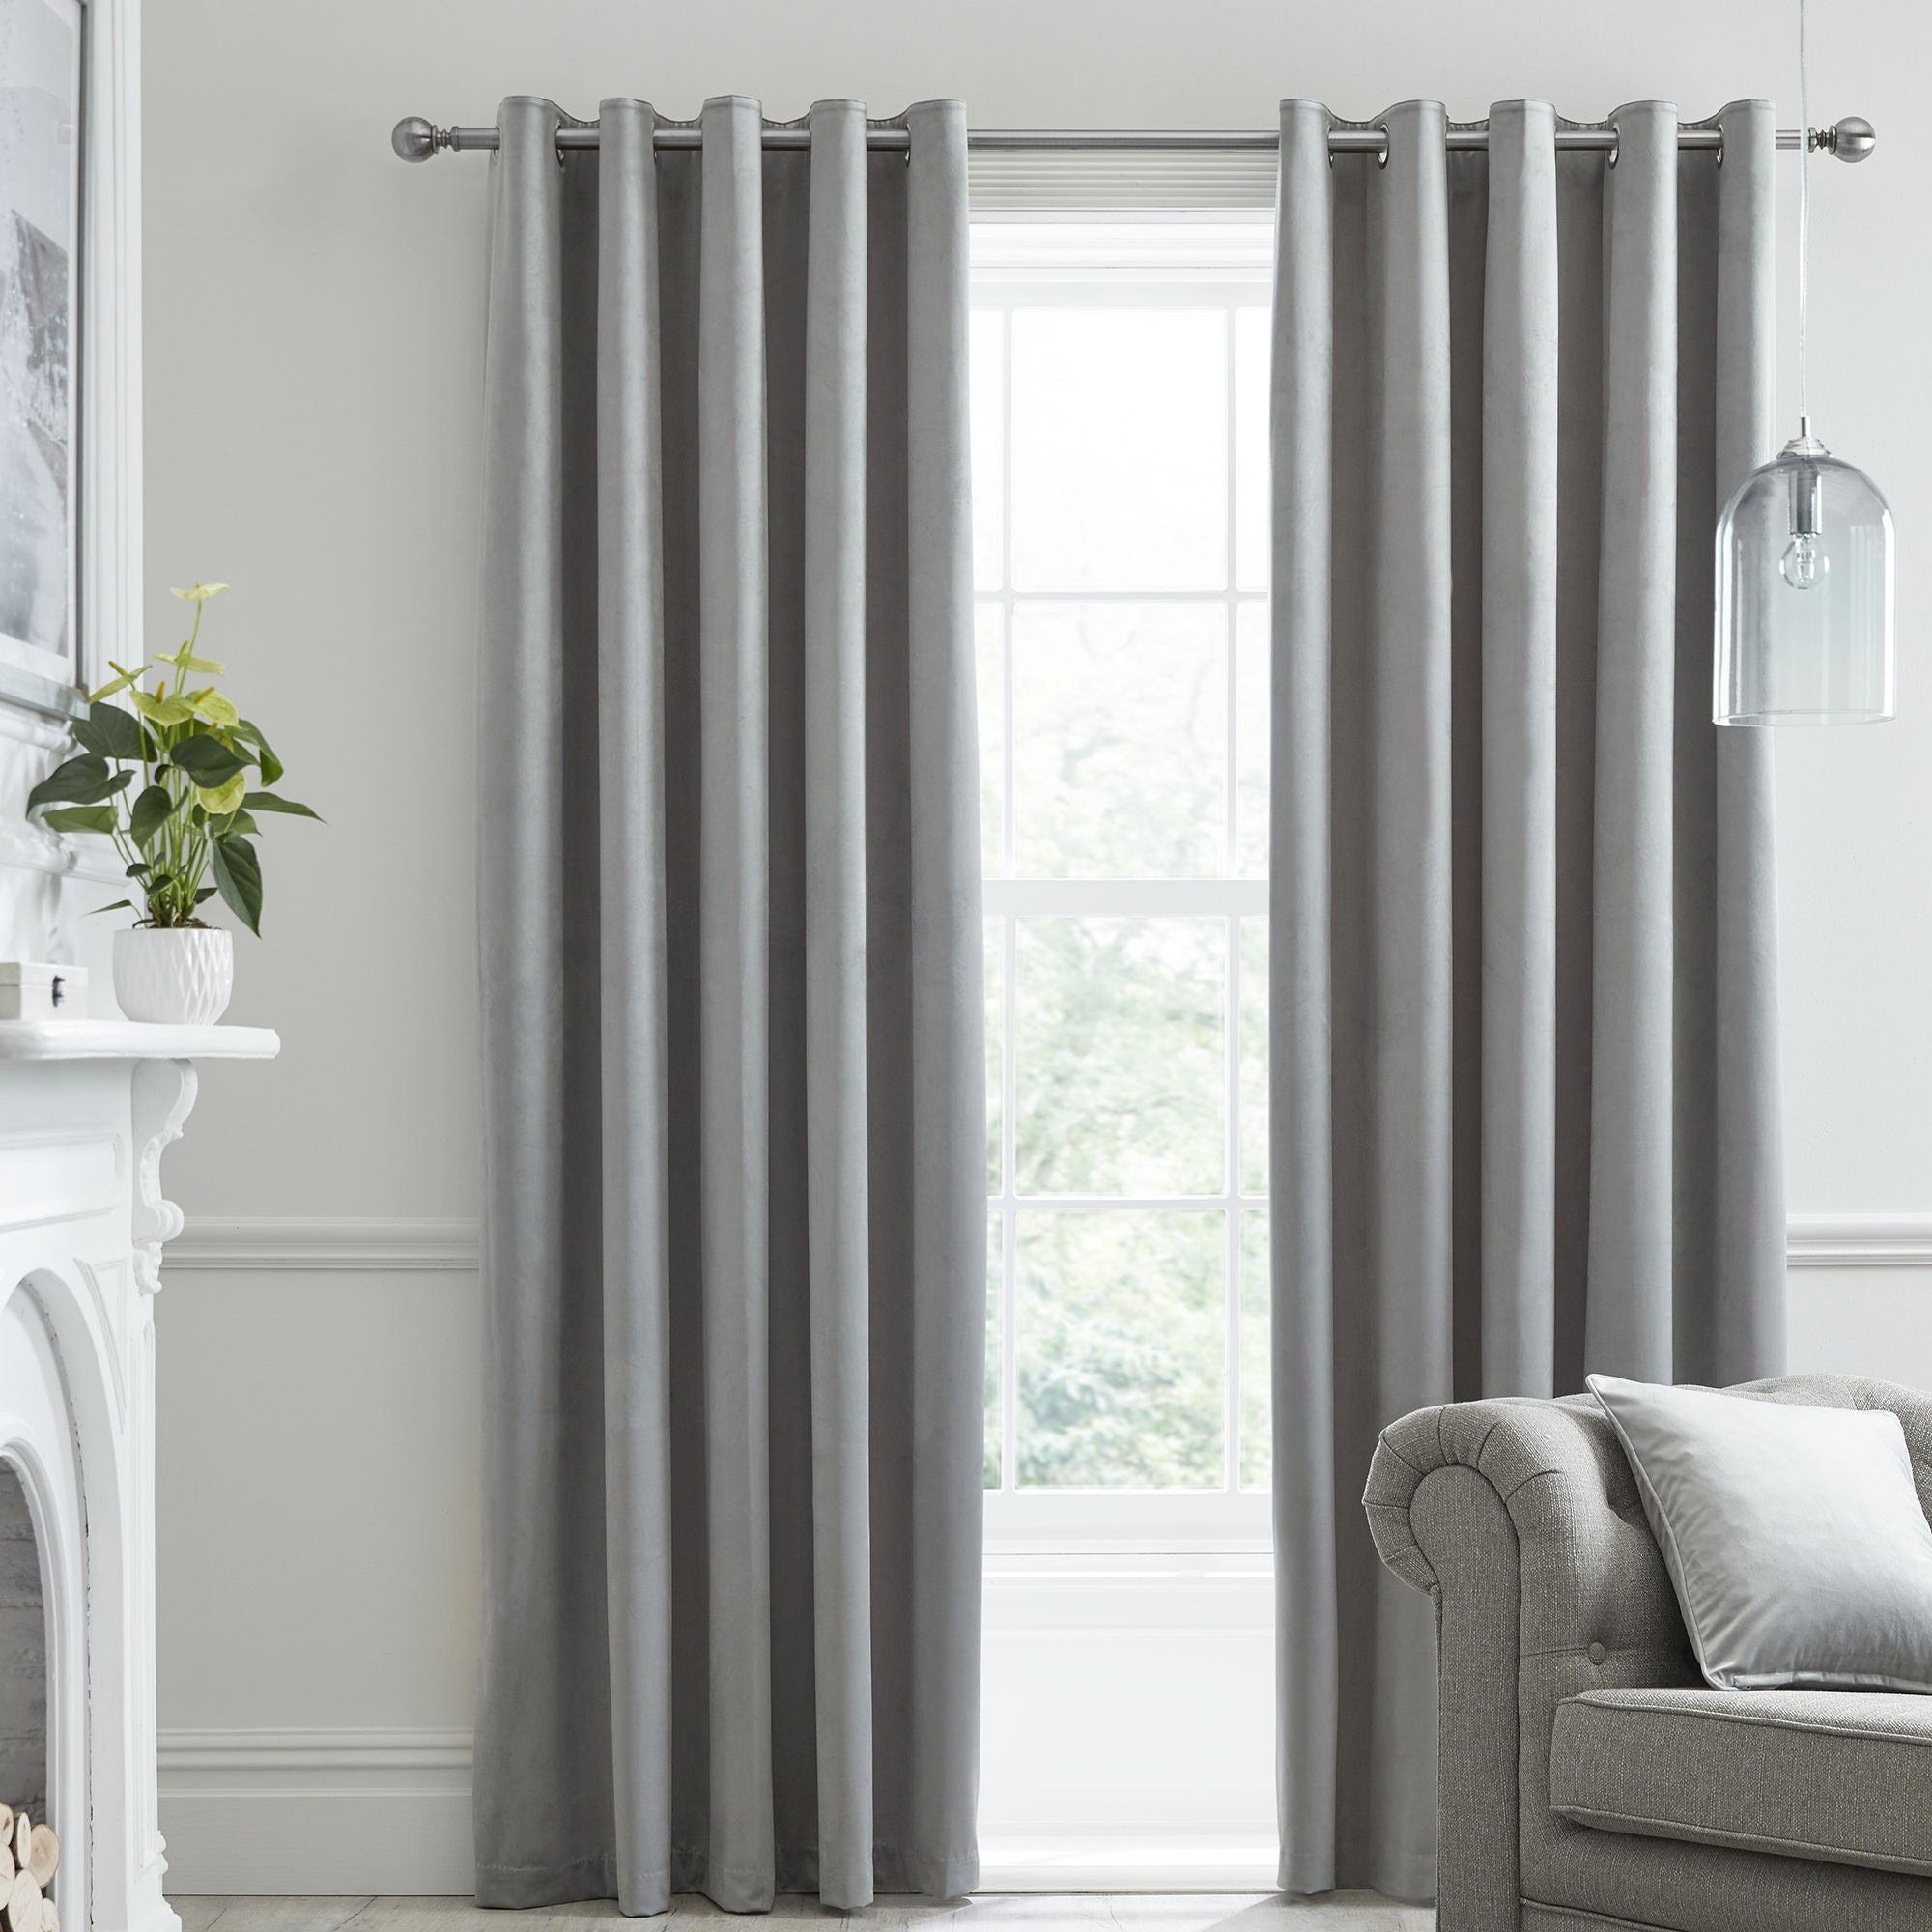 Montrose Pair of Eyelet Curtains by Laurence Llewelyn-Bowen in Silver - Pair of Eyelet Curtains - Laurence Llewelyn-Bowen